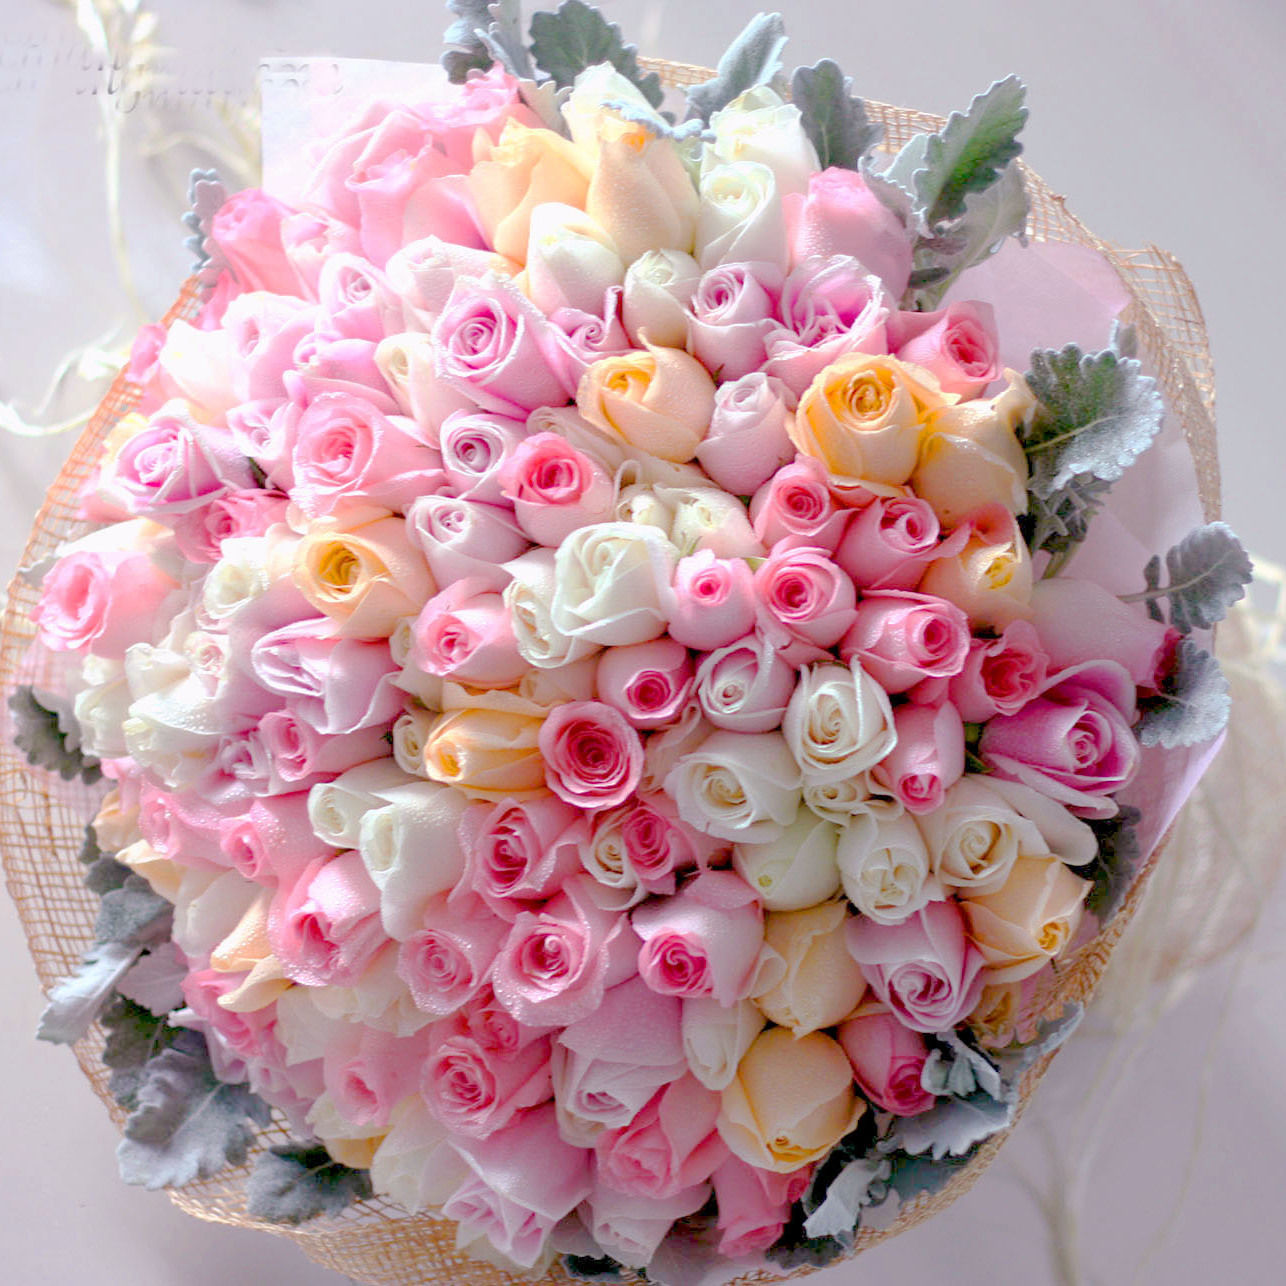 Special Order flower for order to our shop for special day